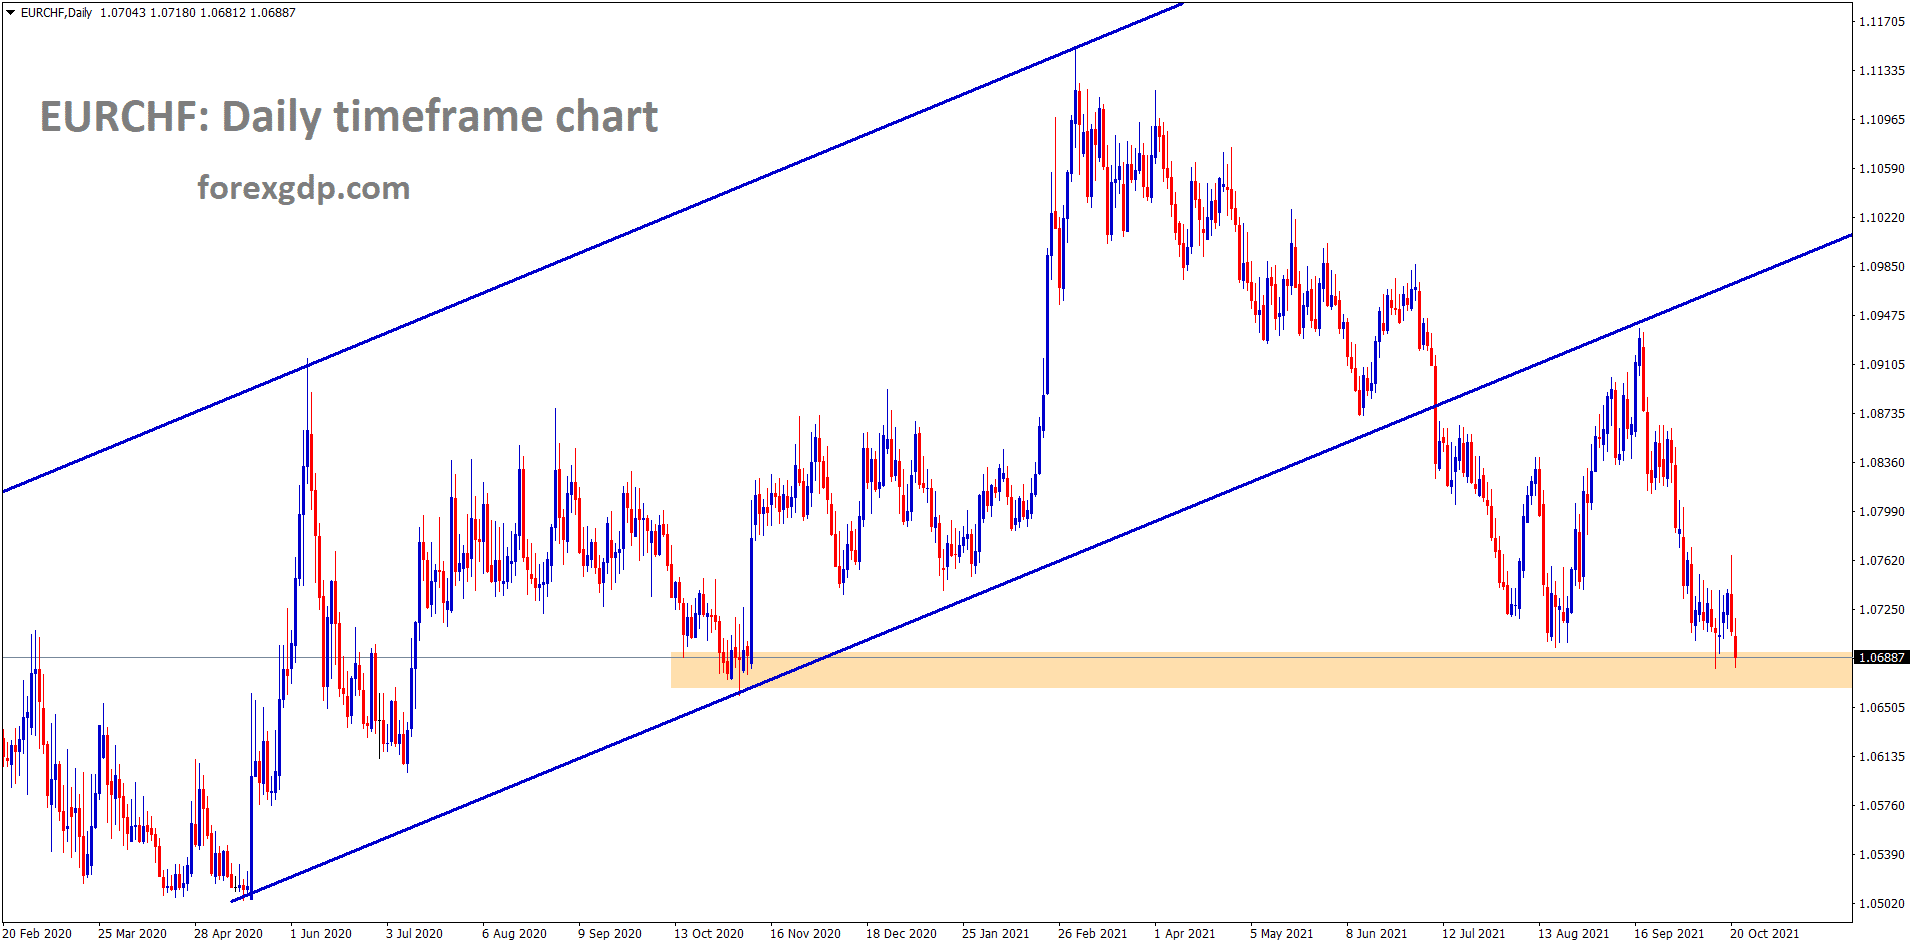 EURCHF after retesting the broken ascending channel price hits the support area in the daily timeframe